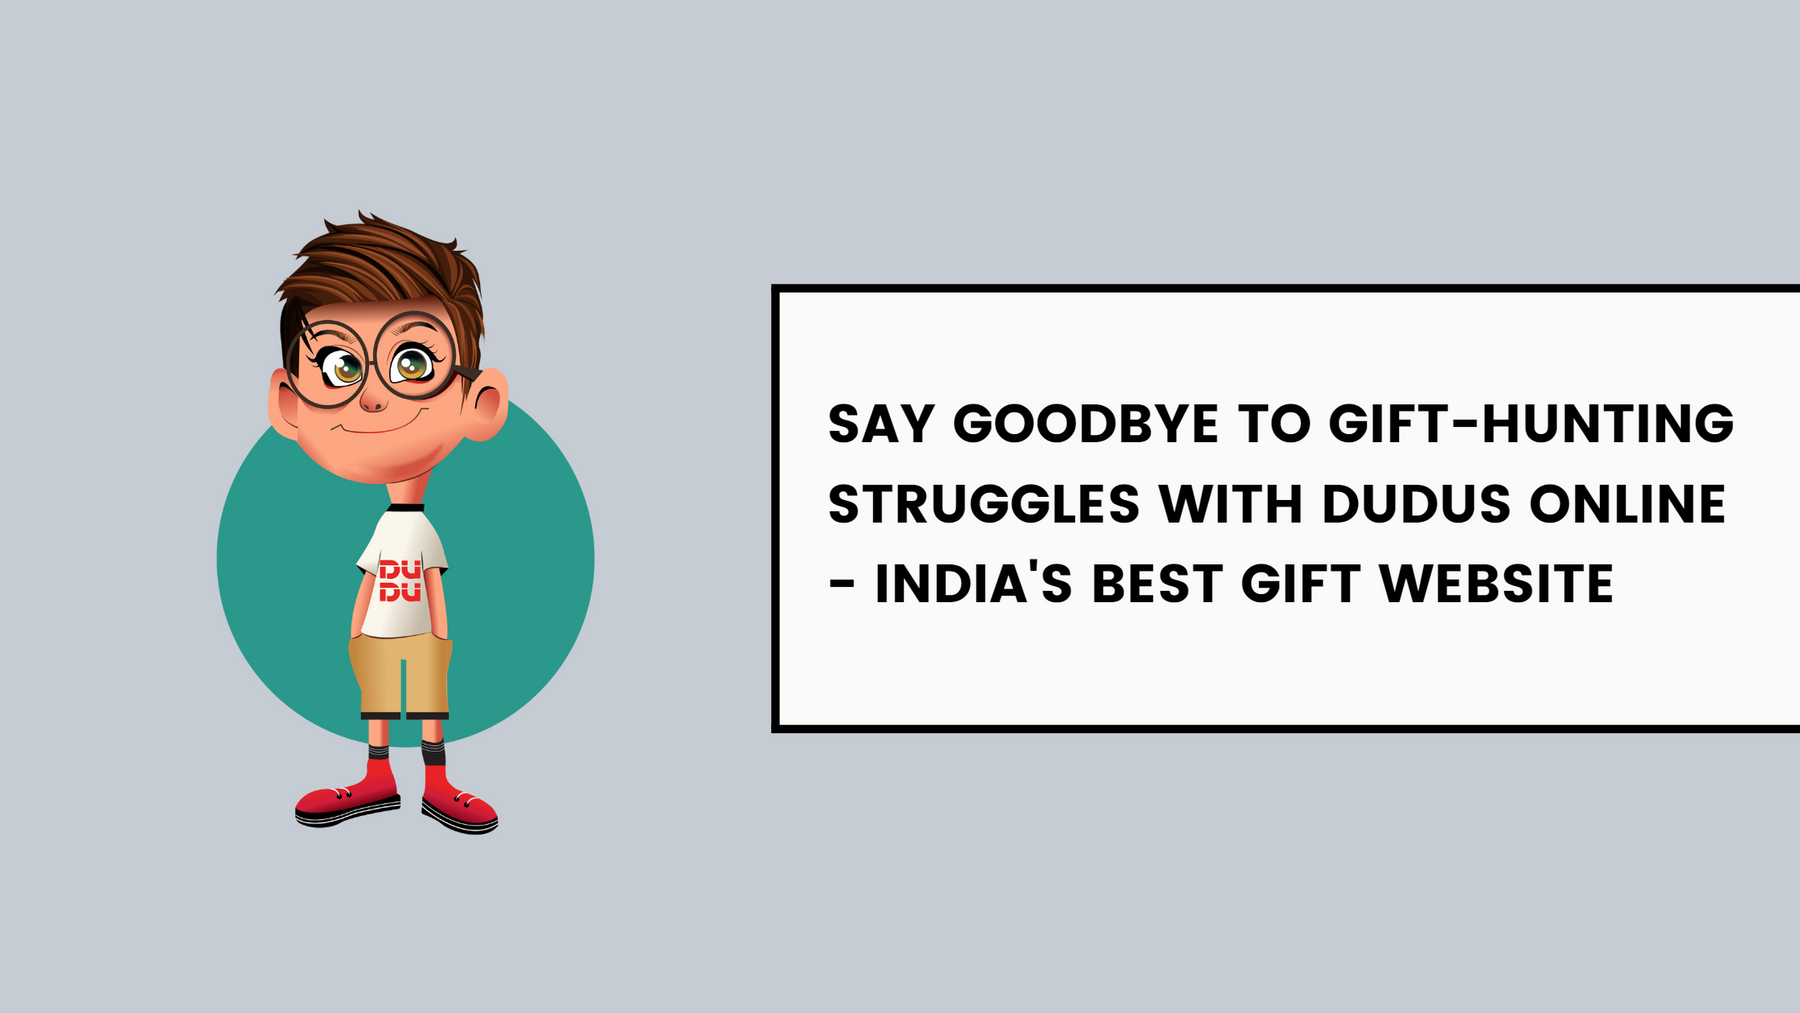 Say Goodbye To Gift-Hunting Struggles With Dudus Online - India's Best Gift Website